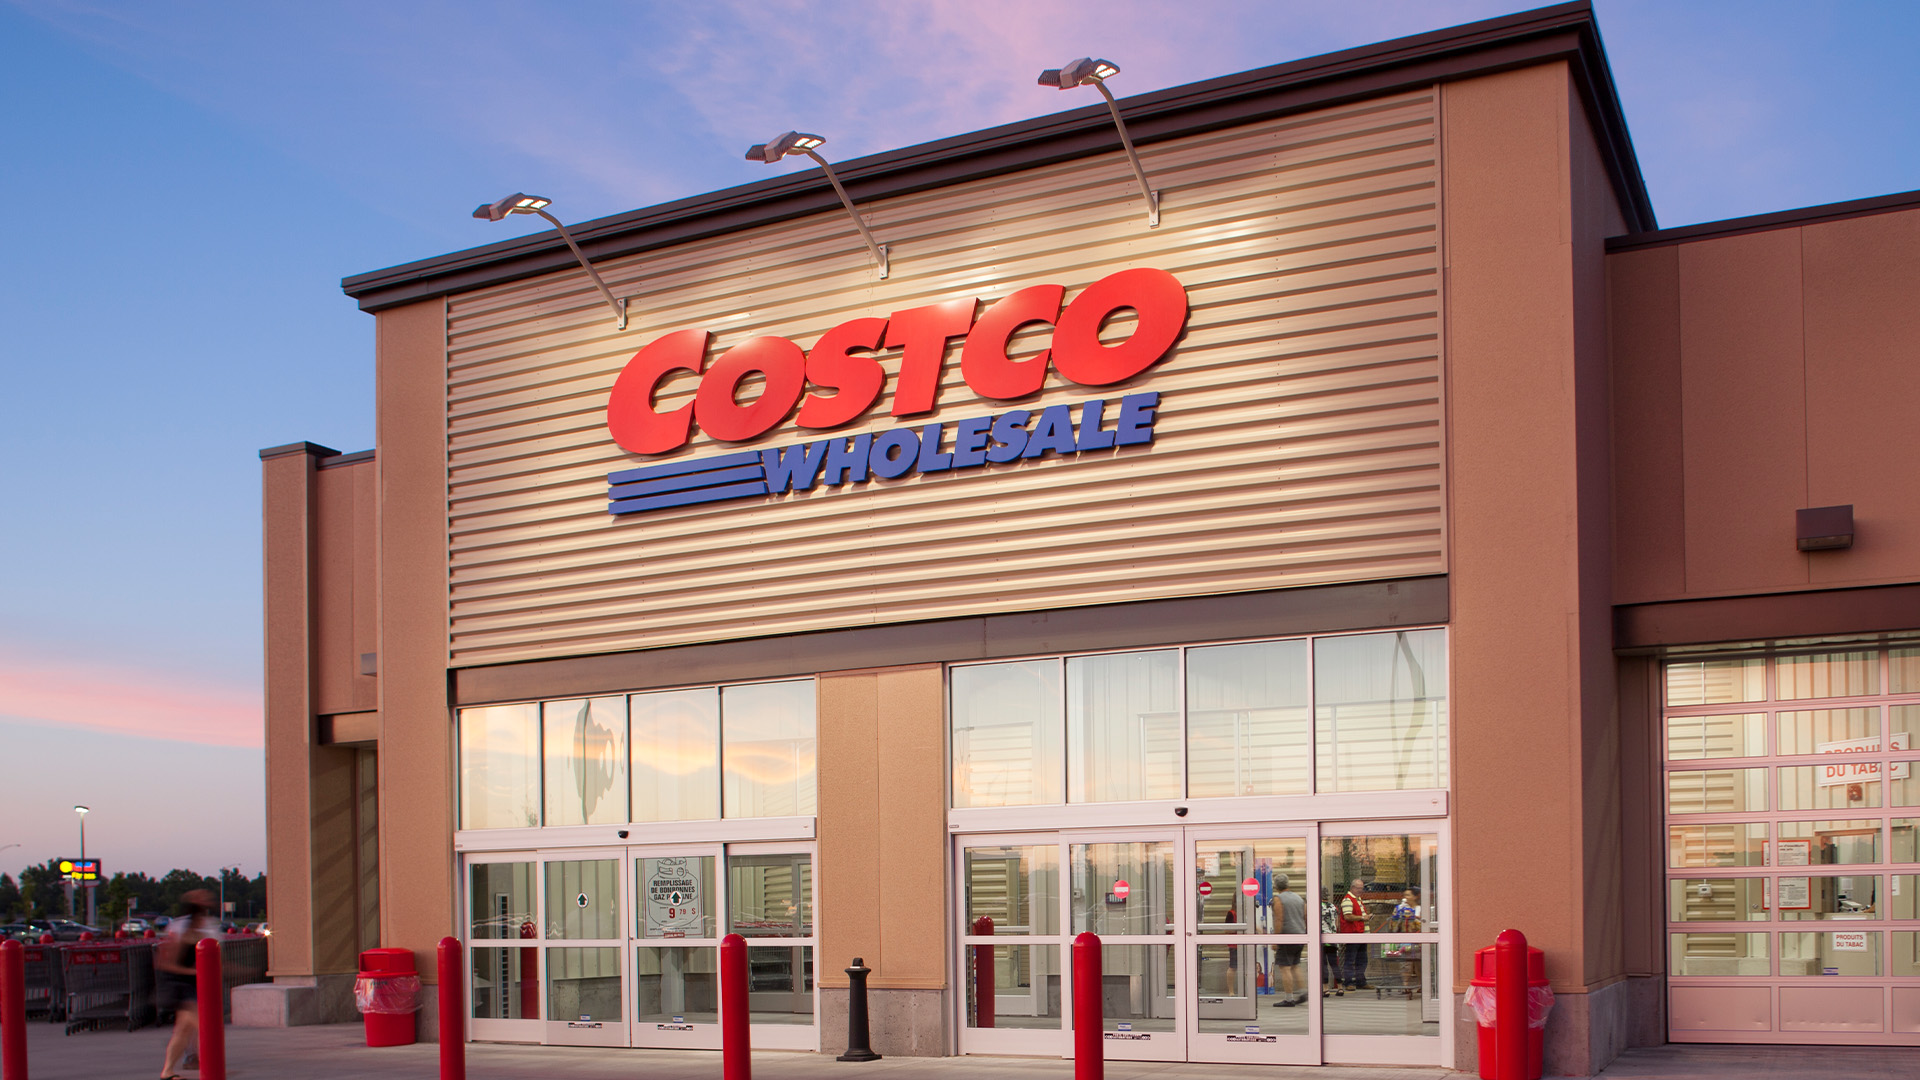 Costco employee reveals the brand shoppers should buy to get ‘quality stuff for less’ during their next visit [Video]